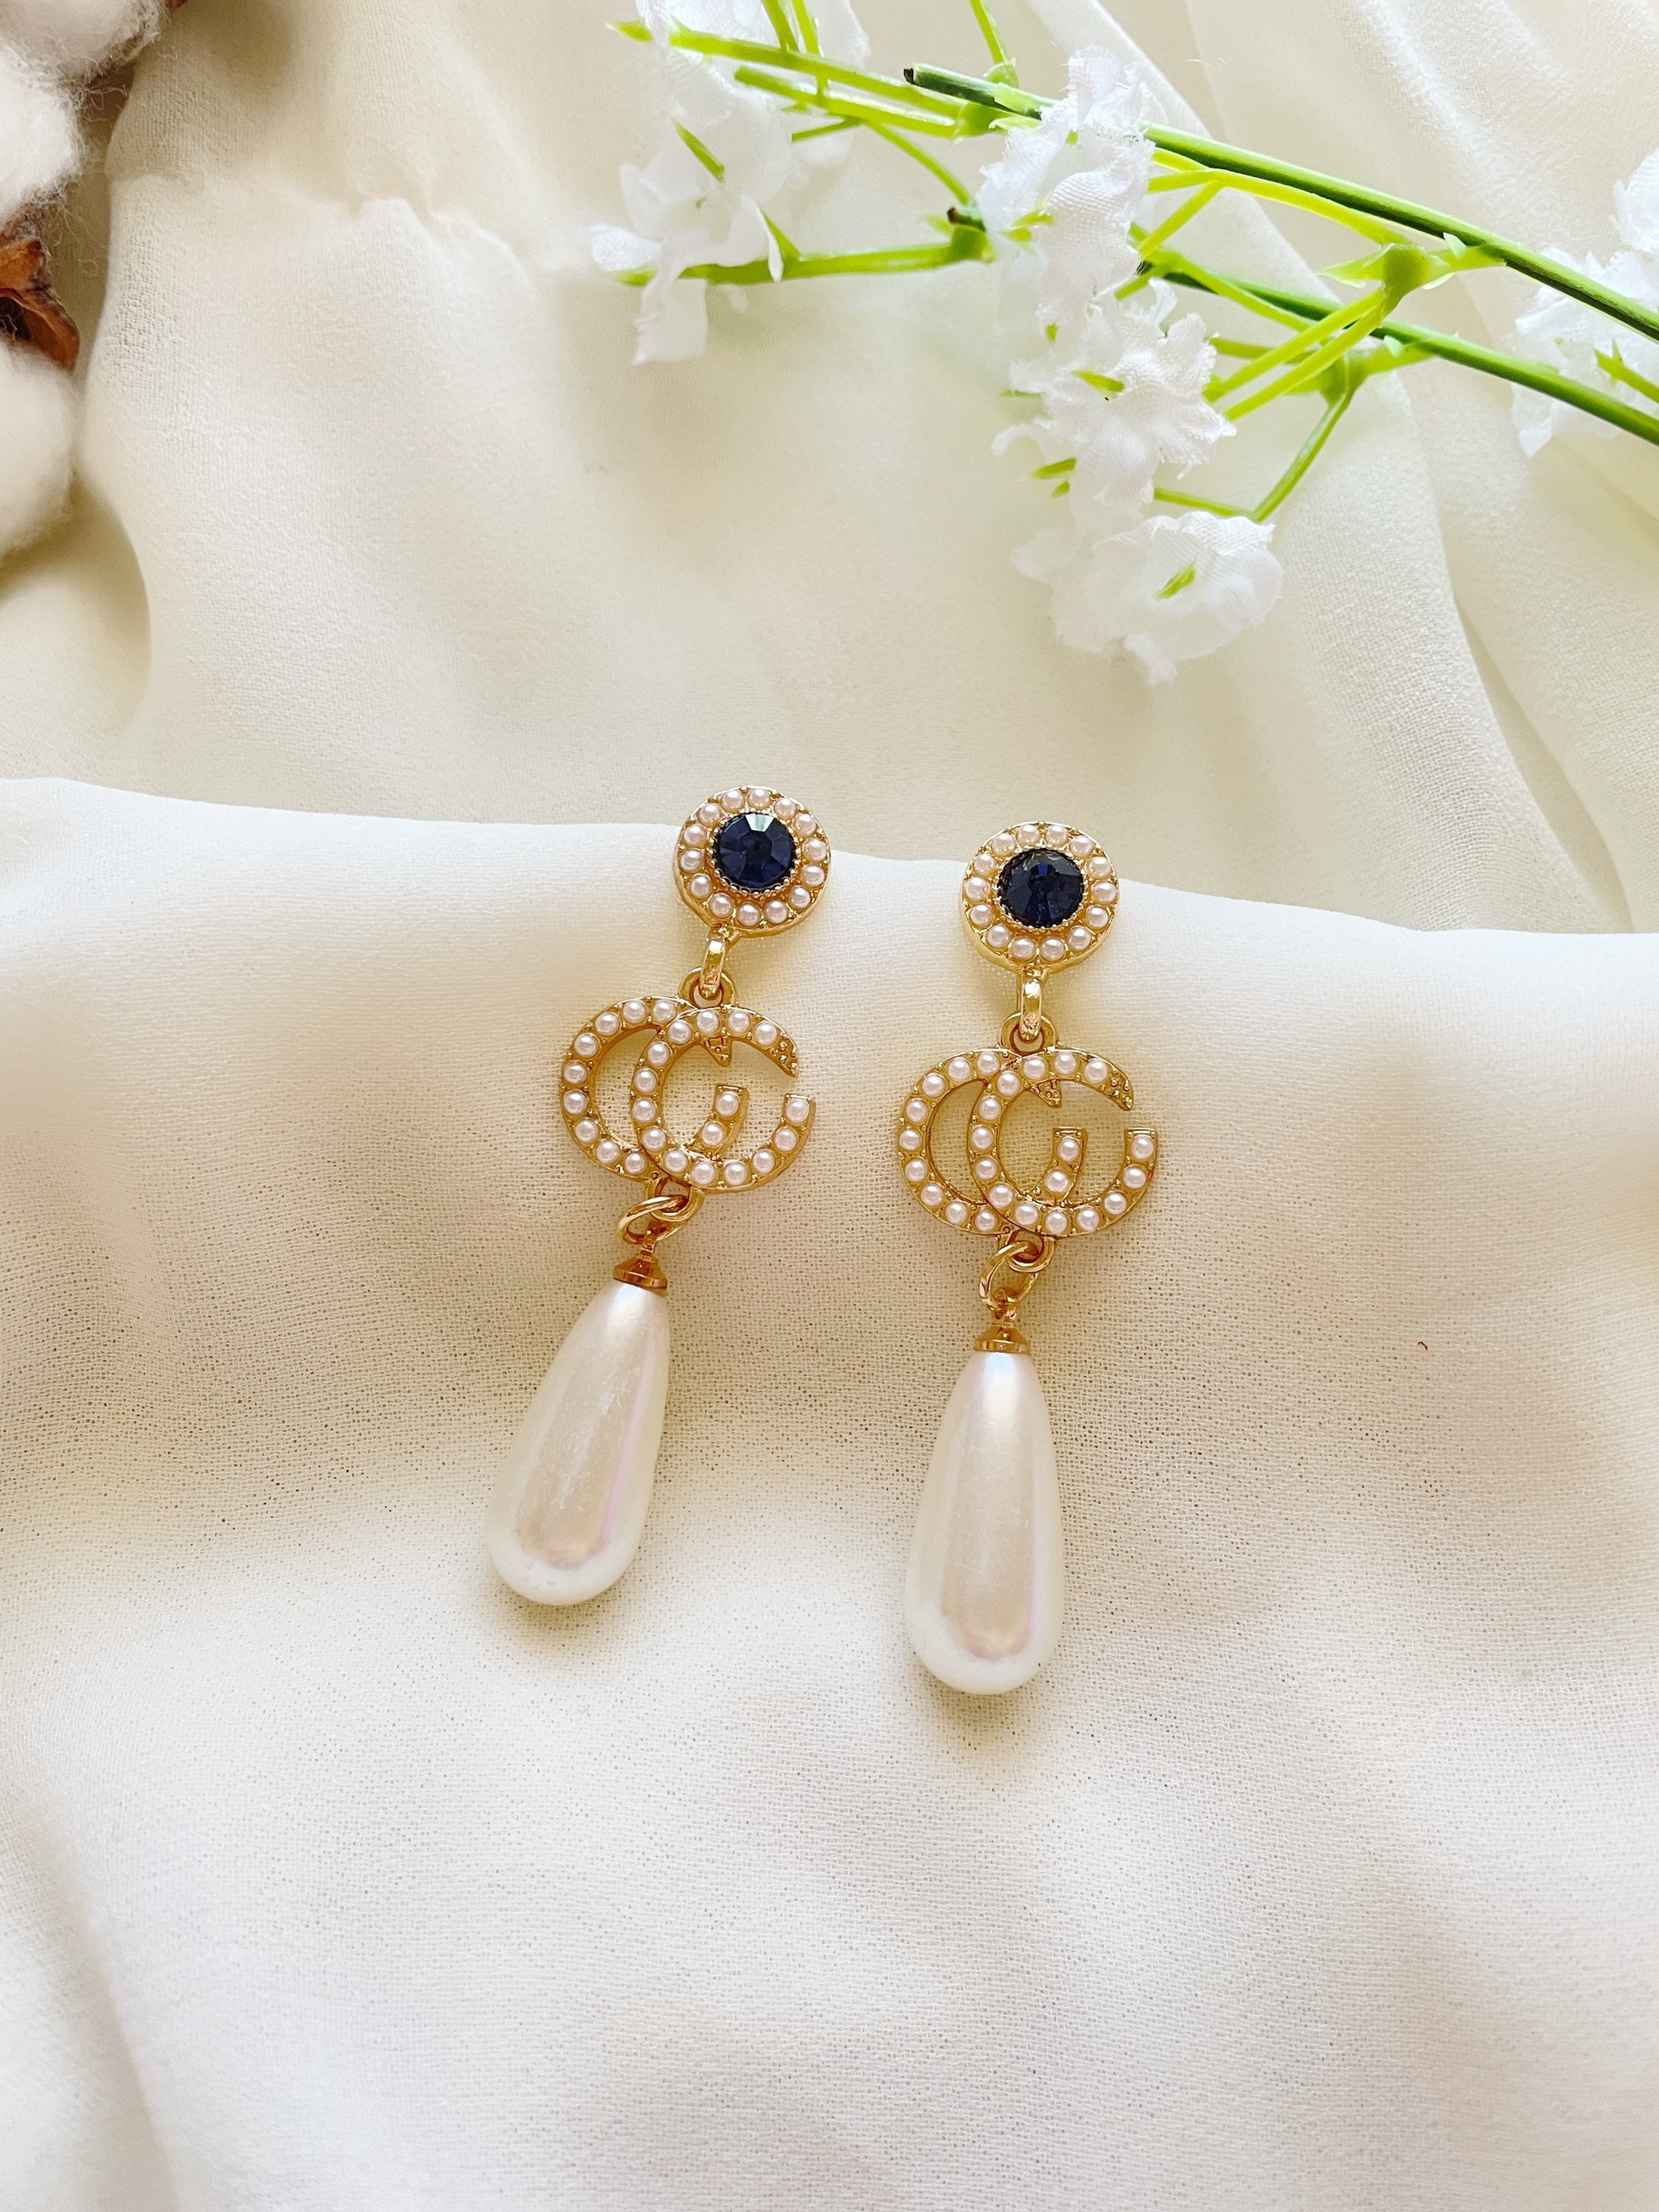 authentic chanel pearl drop earrings vintage